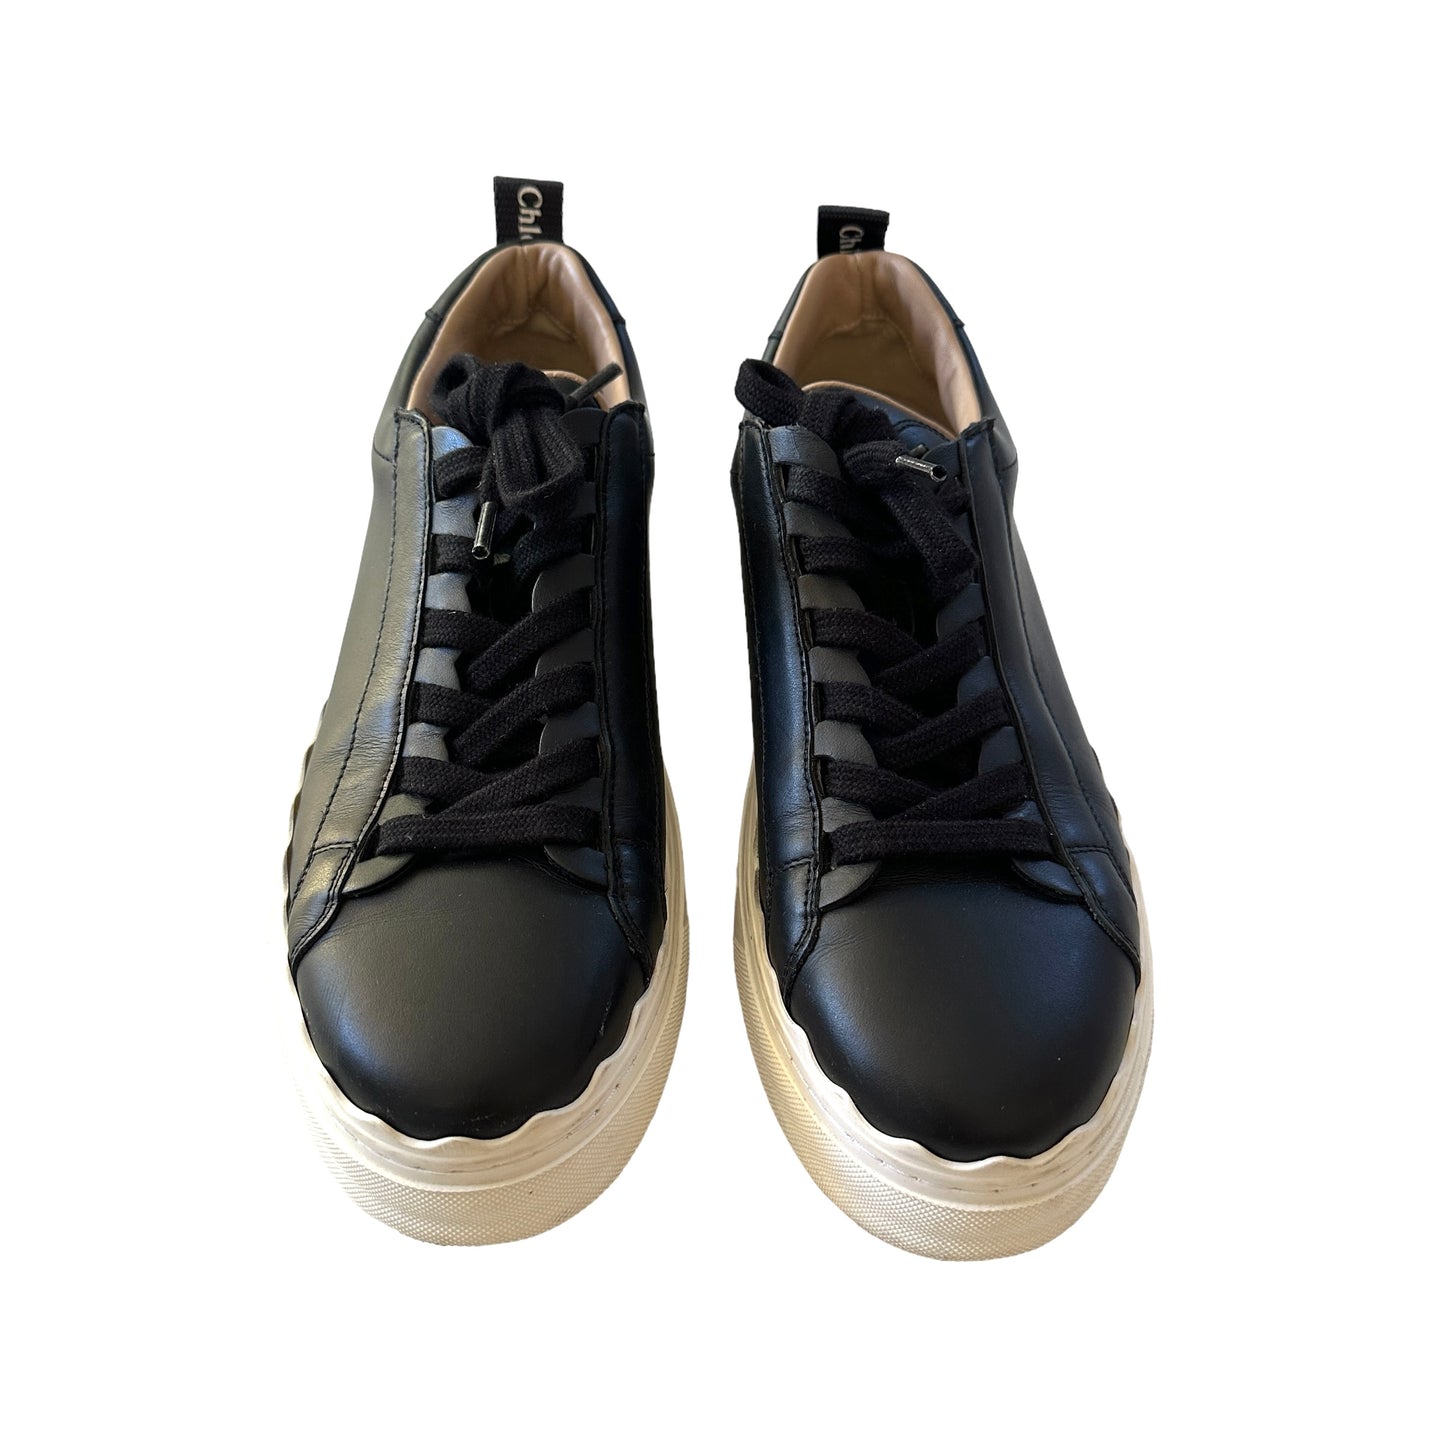 Black Leather Sneakers - 8